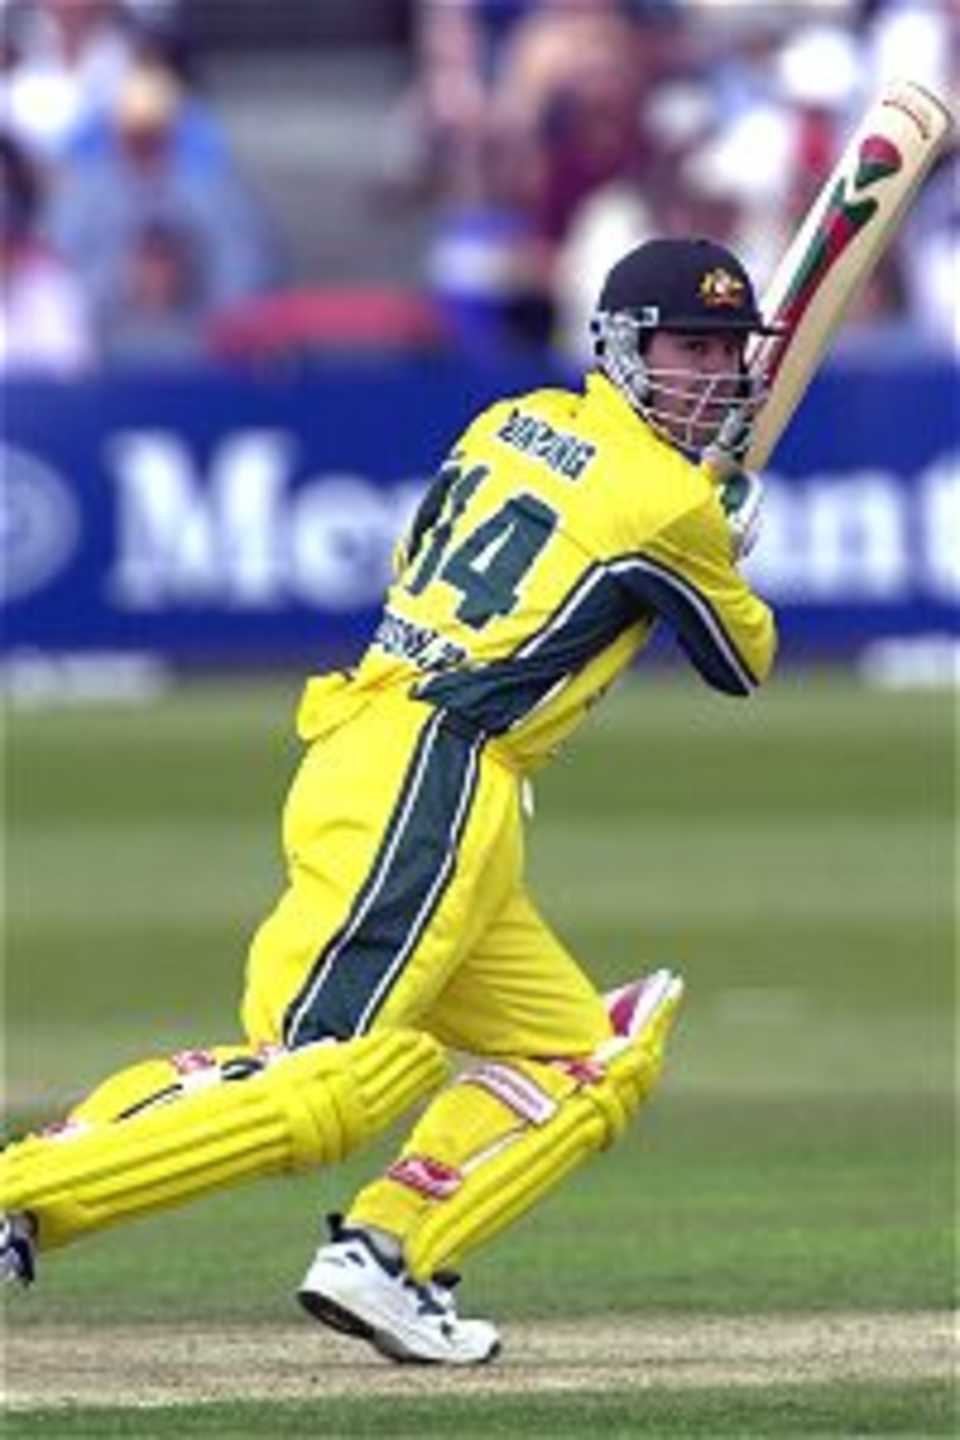 10 June 2001: Australian batsman Ricky Pointing knocks up more runs on his way to a century during the Natwest Trophy game between England and Australia at County Ground, Bristol